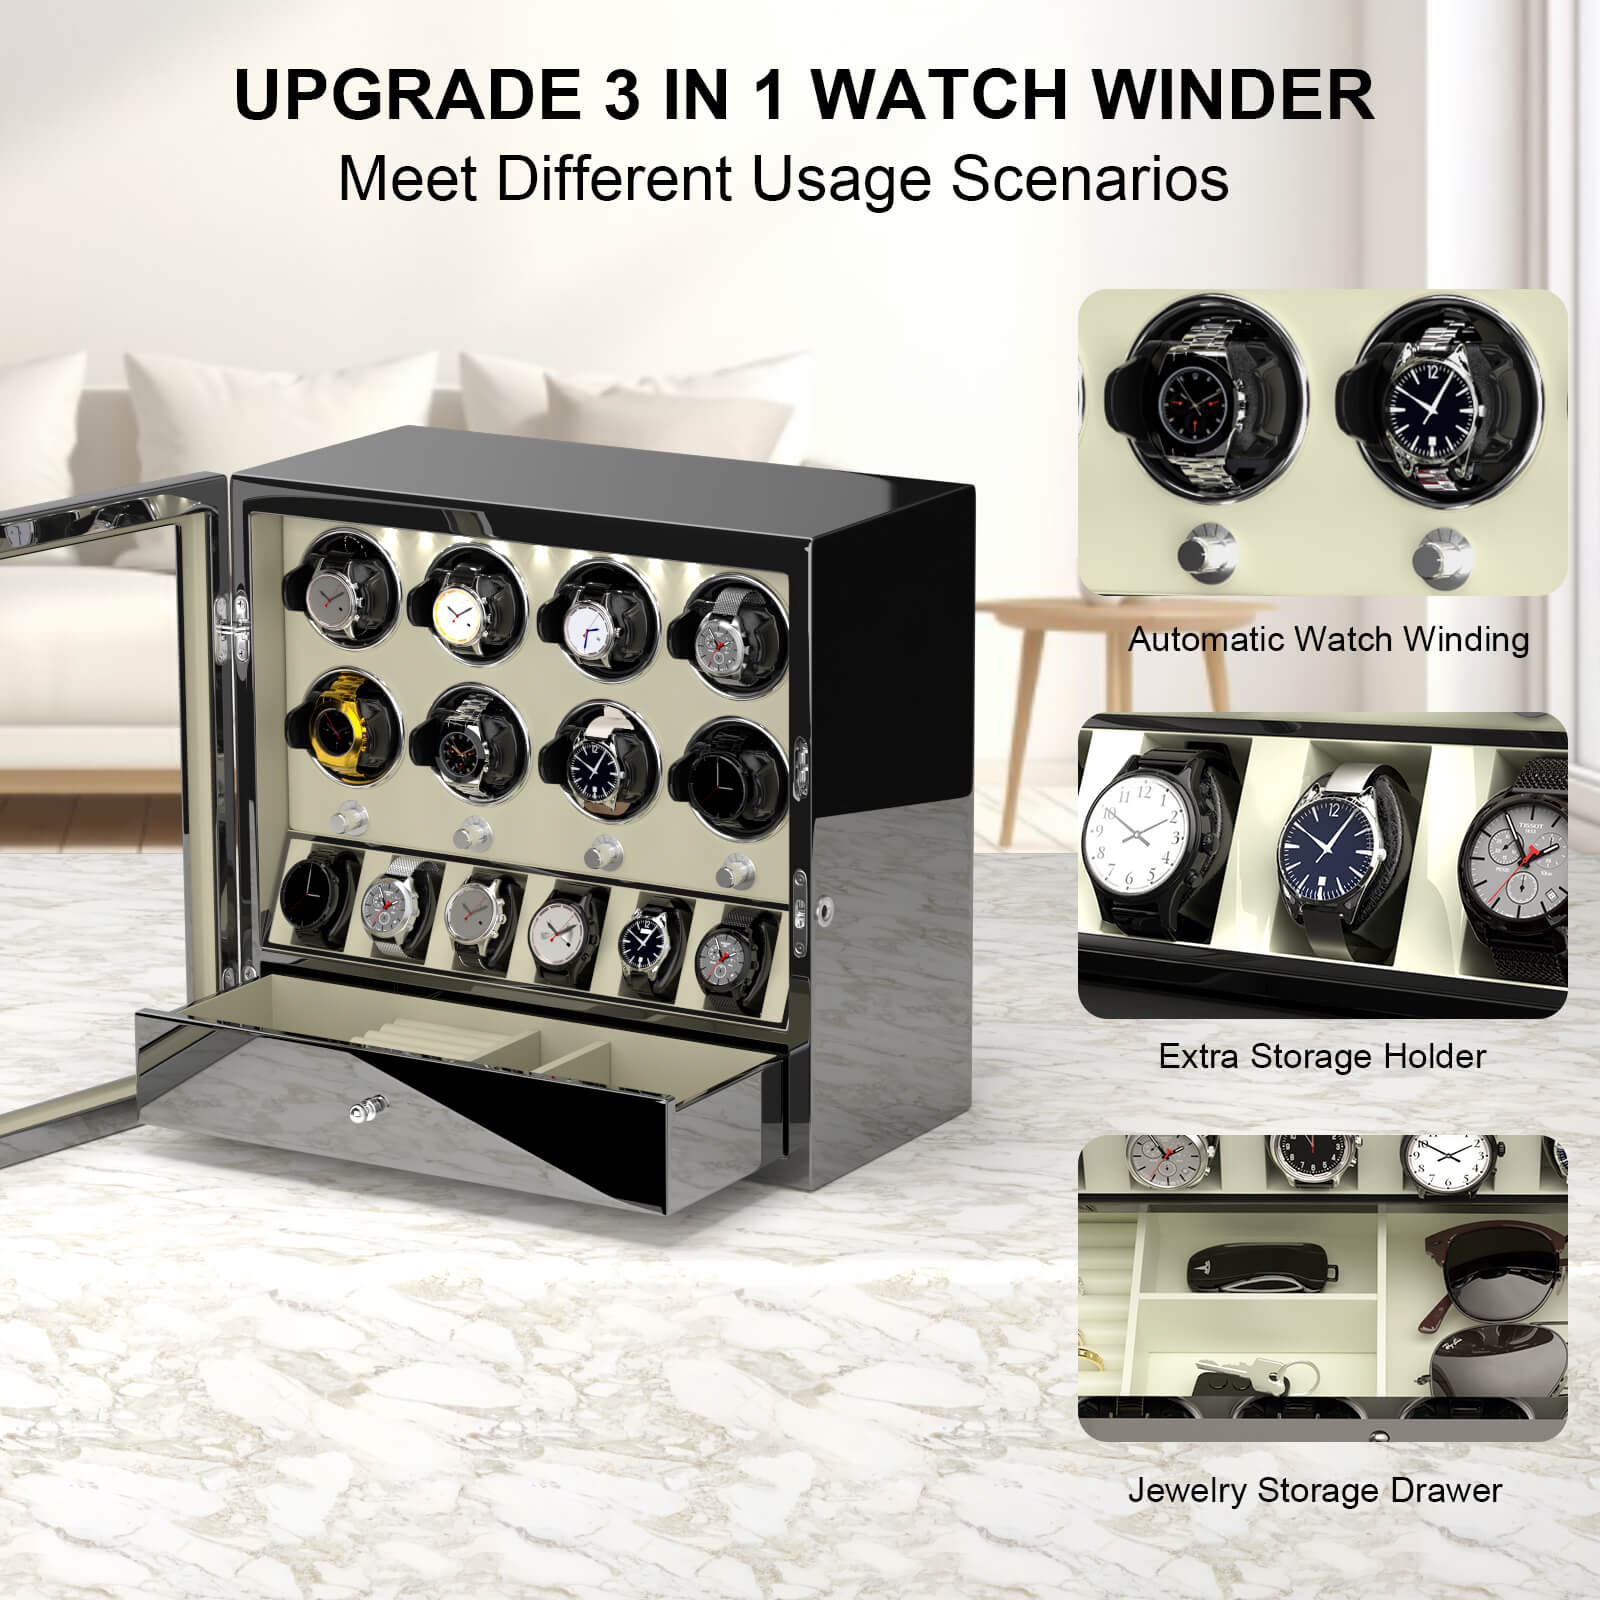 Compact 8 Watch Winders with 6 Watches Large Storage Space Quiet Mabuchi Motor - Off-white